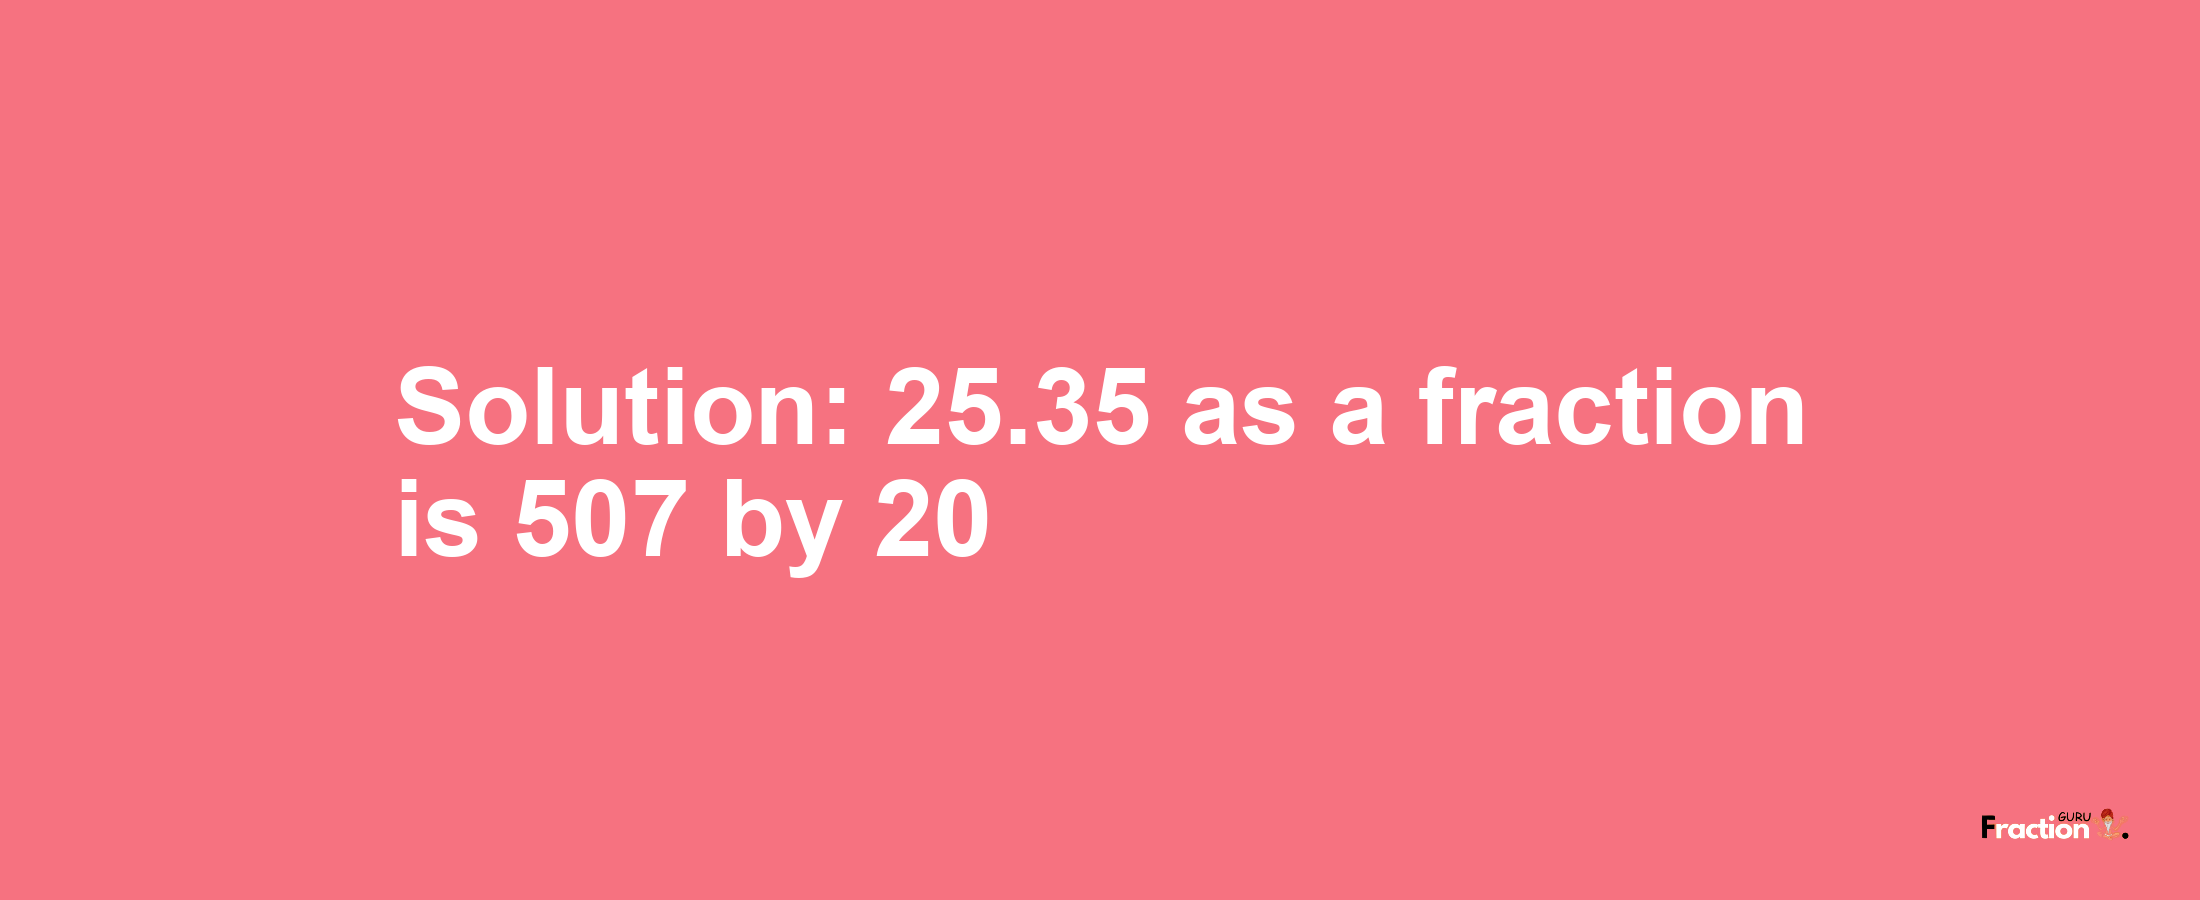 Solution:25.35 as a fraction is 507/20